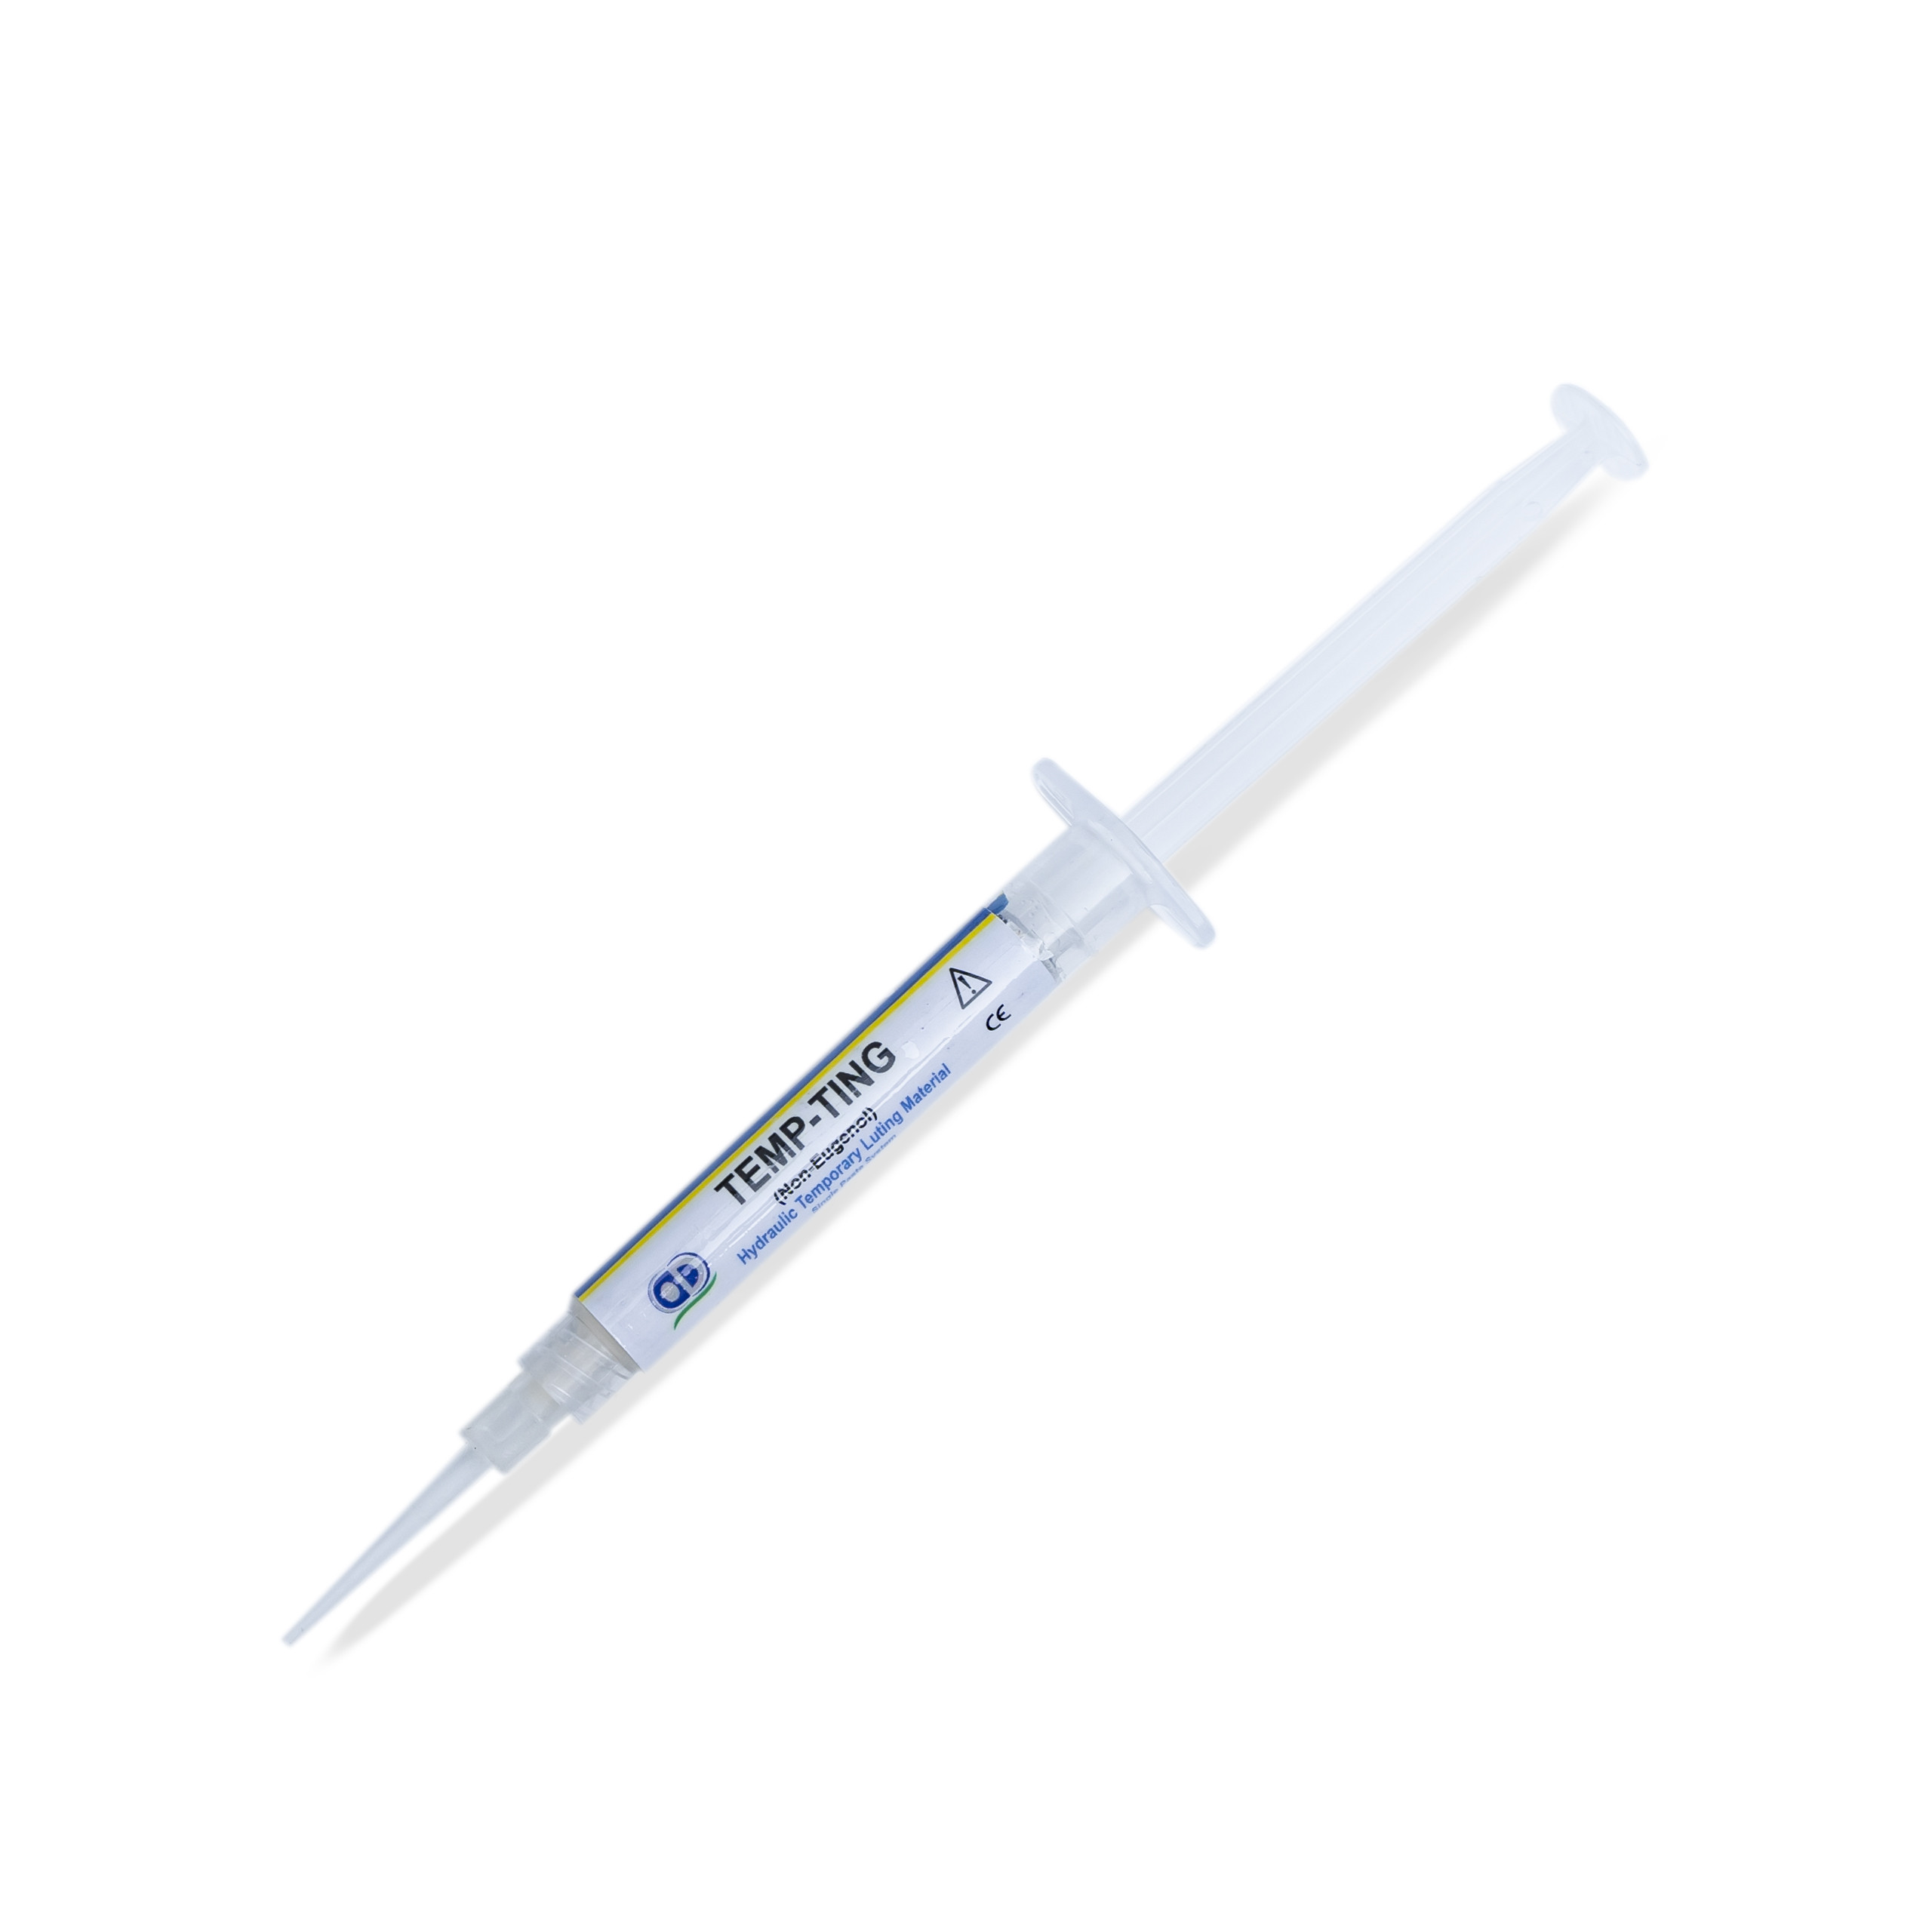 Ammdent Temp-Ting Non Eugenol Temporary Luting Material 6.7gm Tube